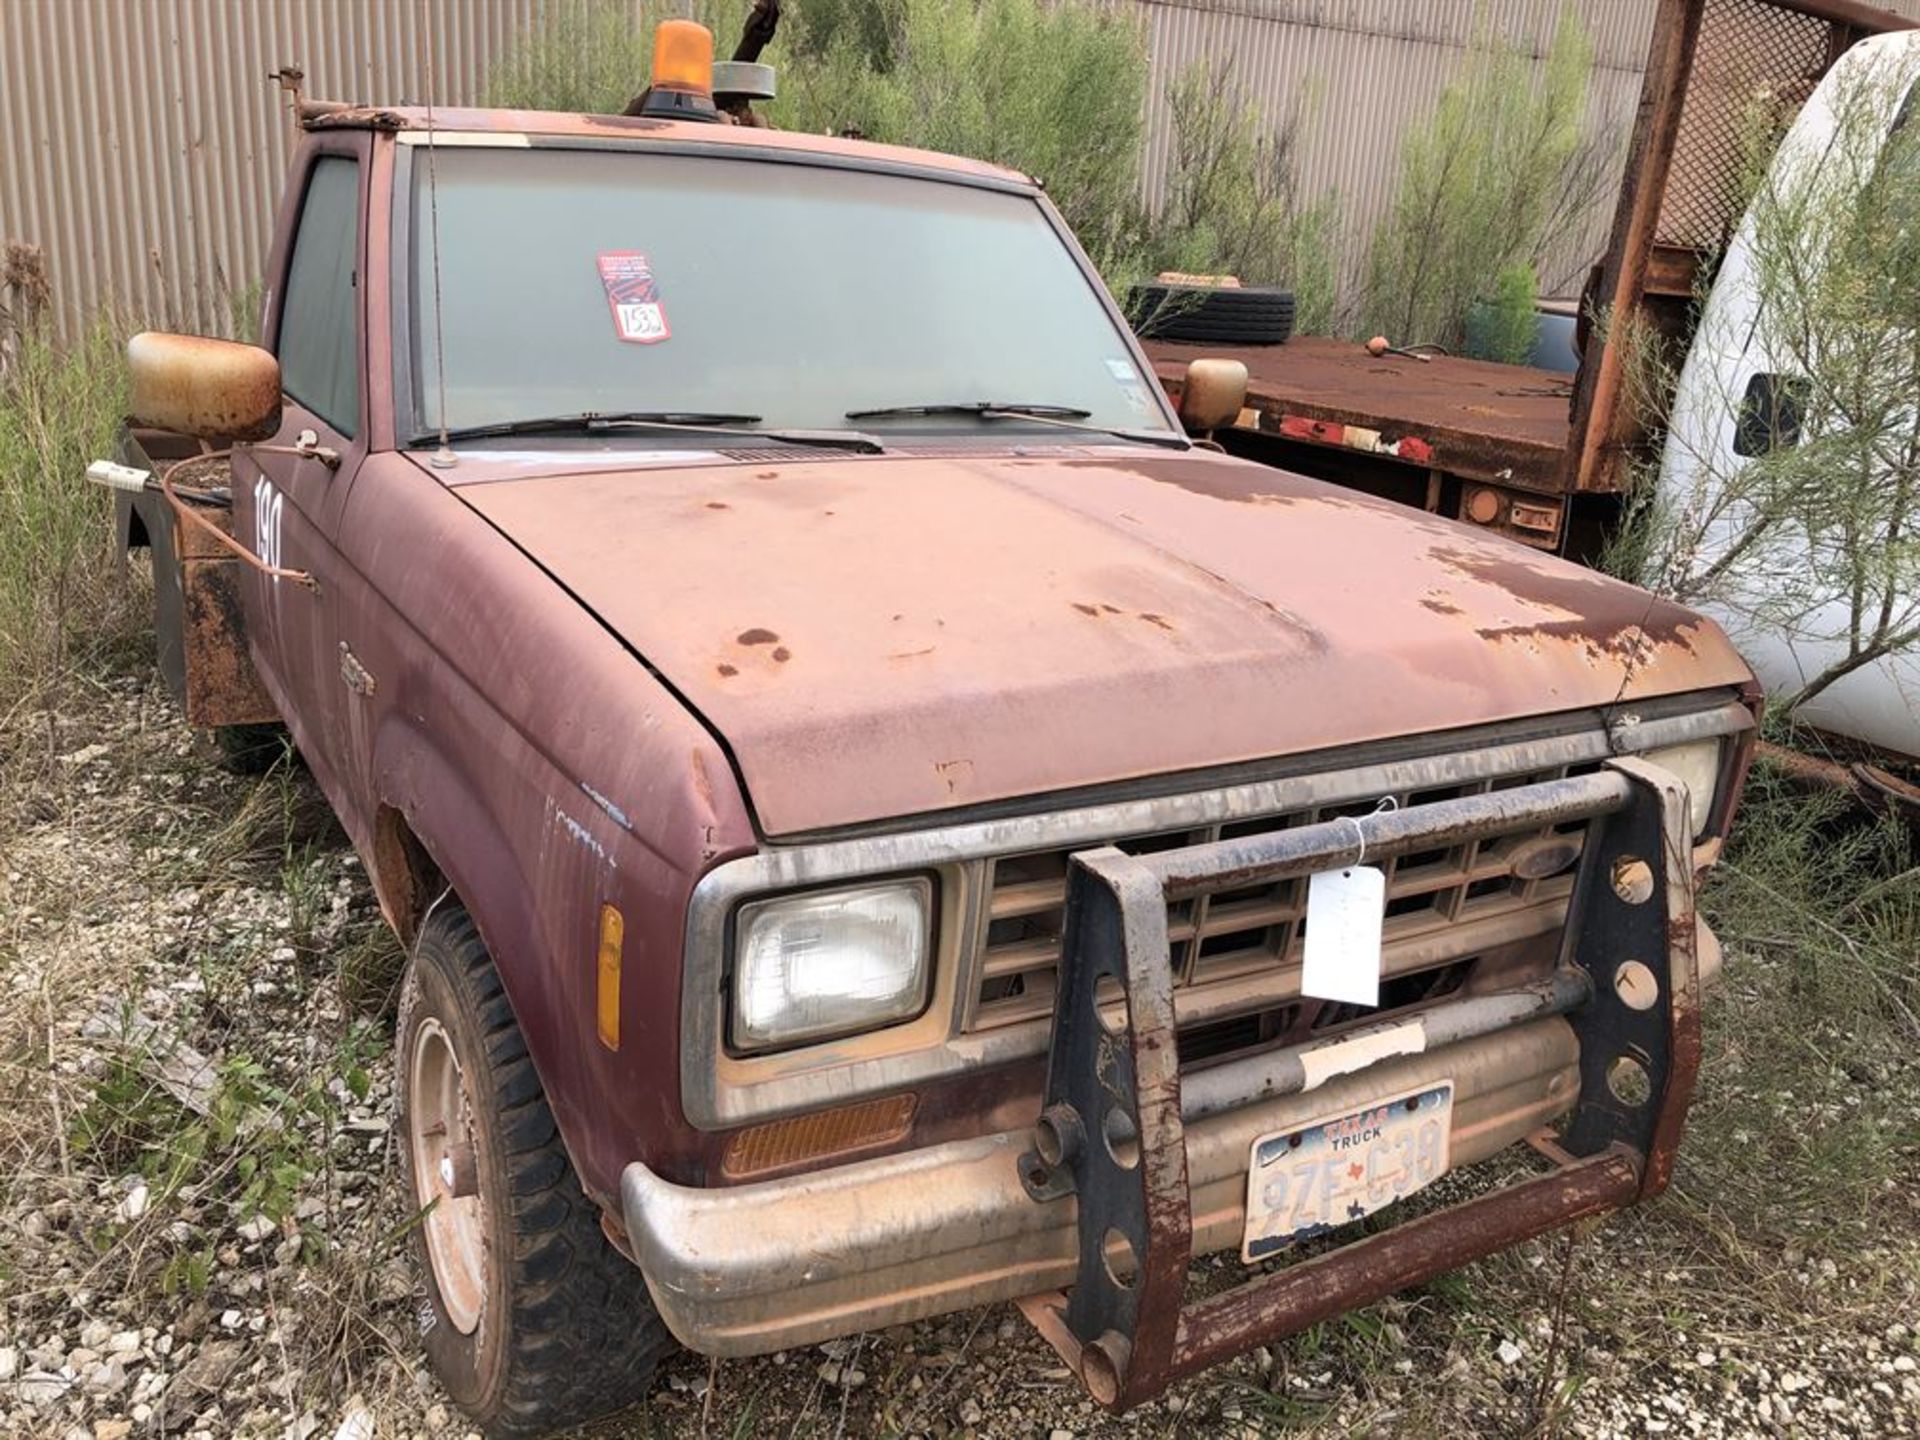 1988 Ford Ranger Flatbed Pickup, VIN 1FTCR11T2JU398186, 4x4, 53,582 Miles, w/ 30 Gallon Air